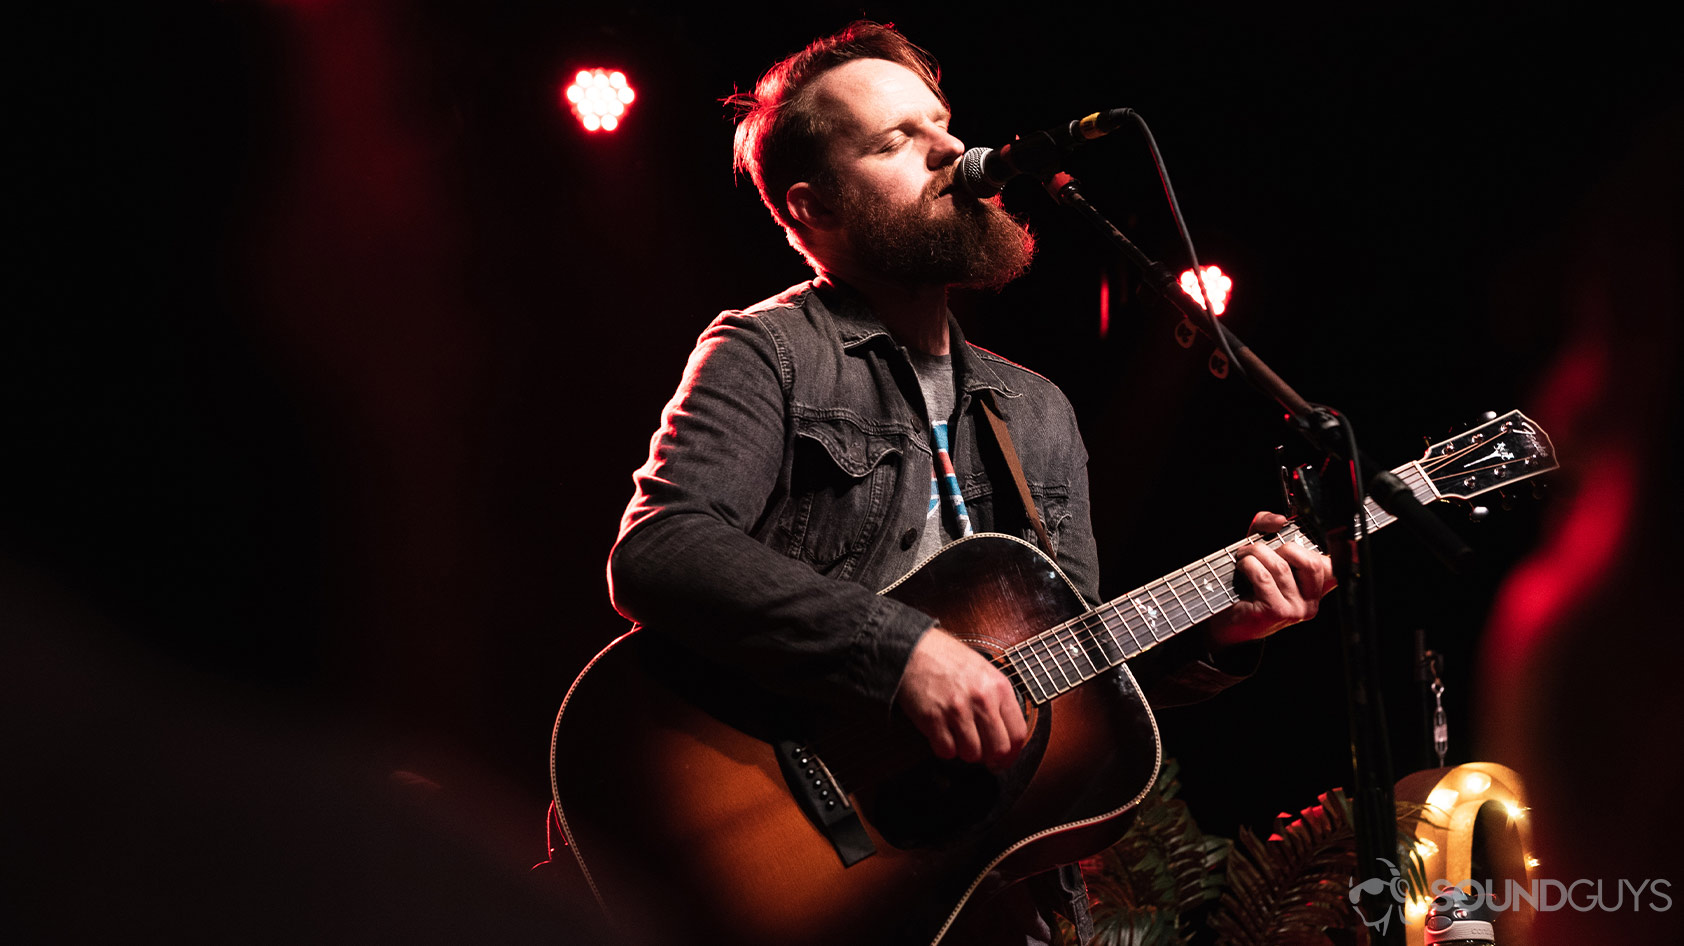 A picture of Aaron West performing with an acoustic guitar as red light is cast down on stage.